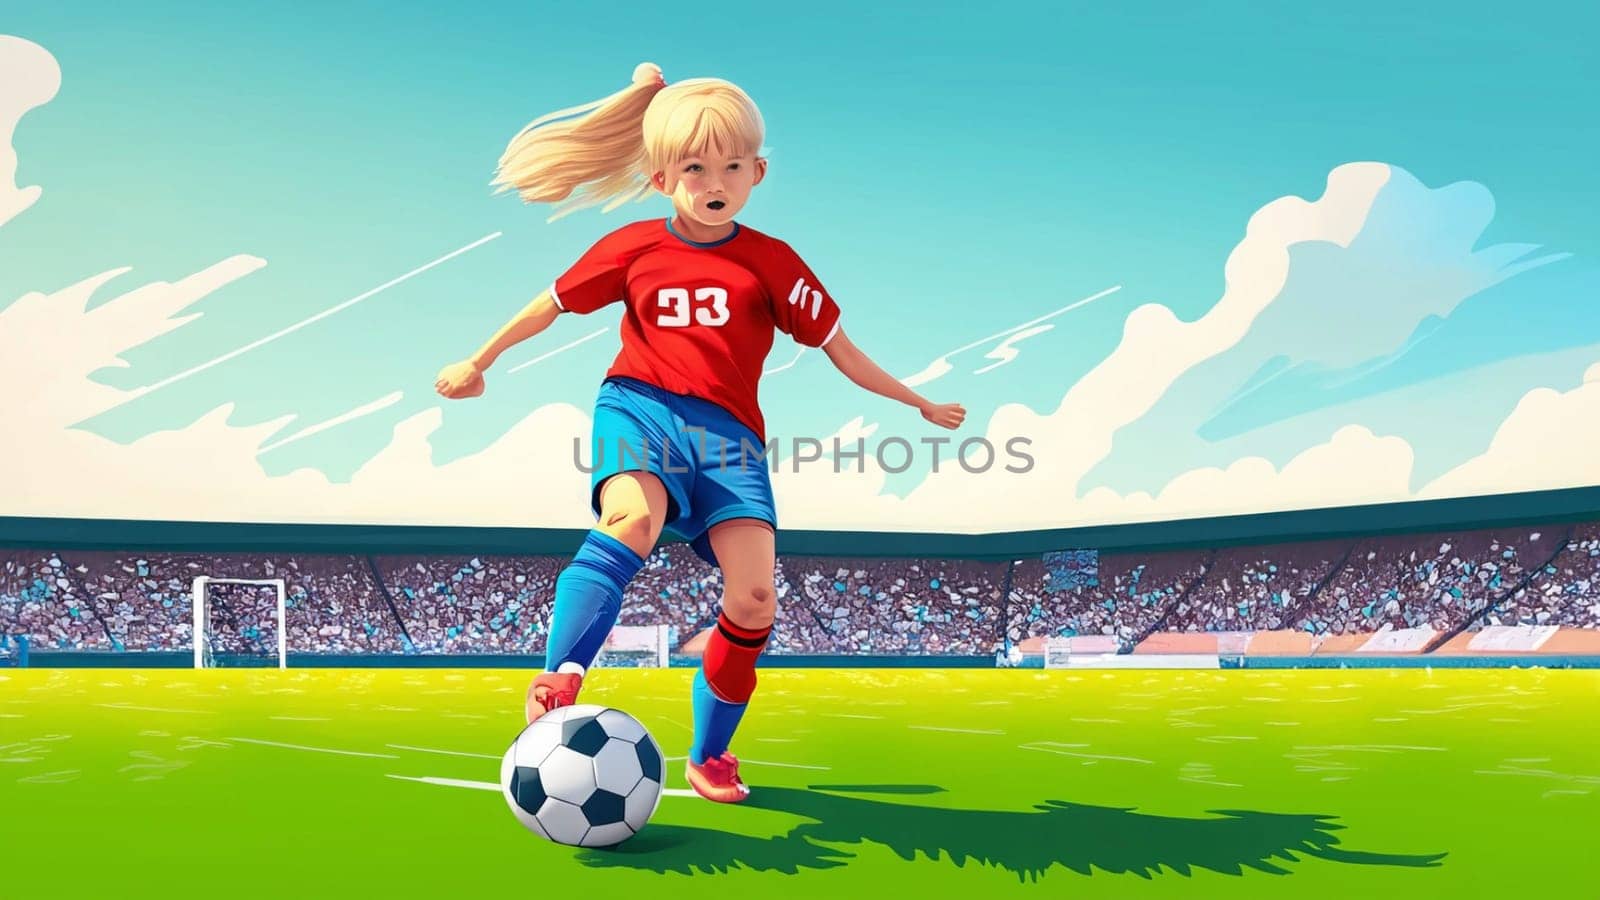 A young girl football player in colors of national spain football team plays with her feet a soccer ball. illustrations in cartoon style on sport stadium background for children High quality illustration